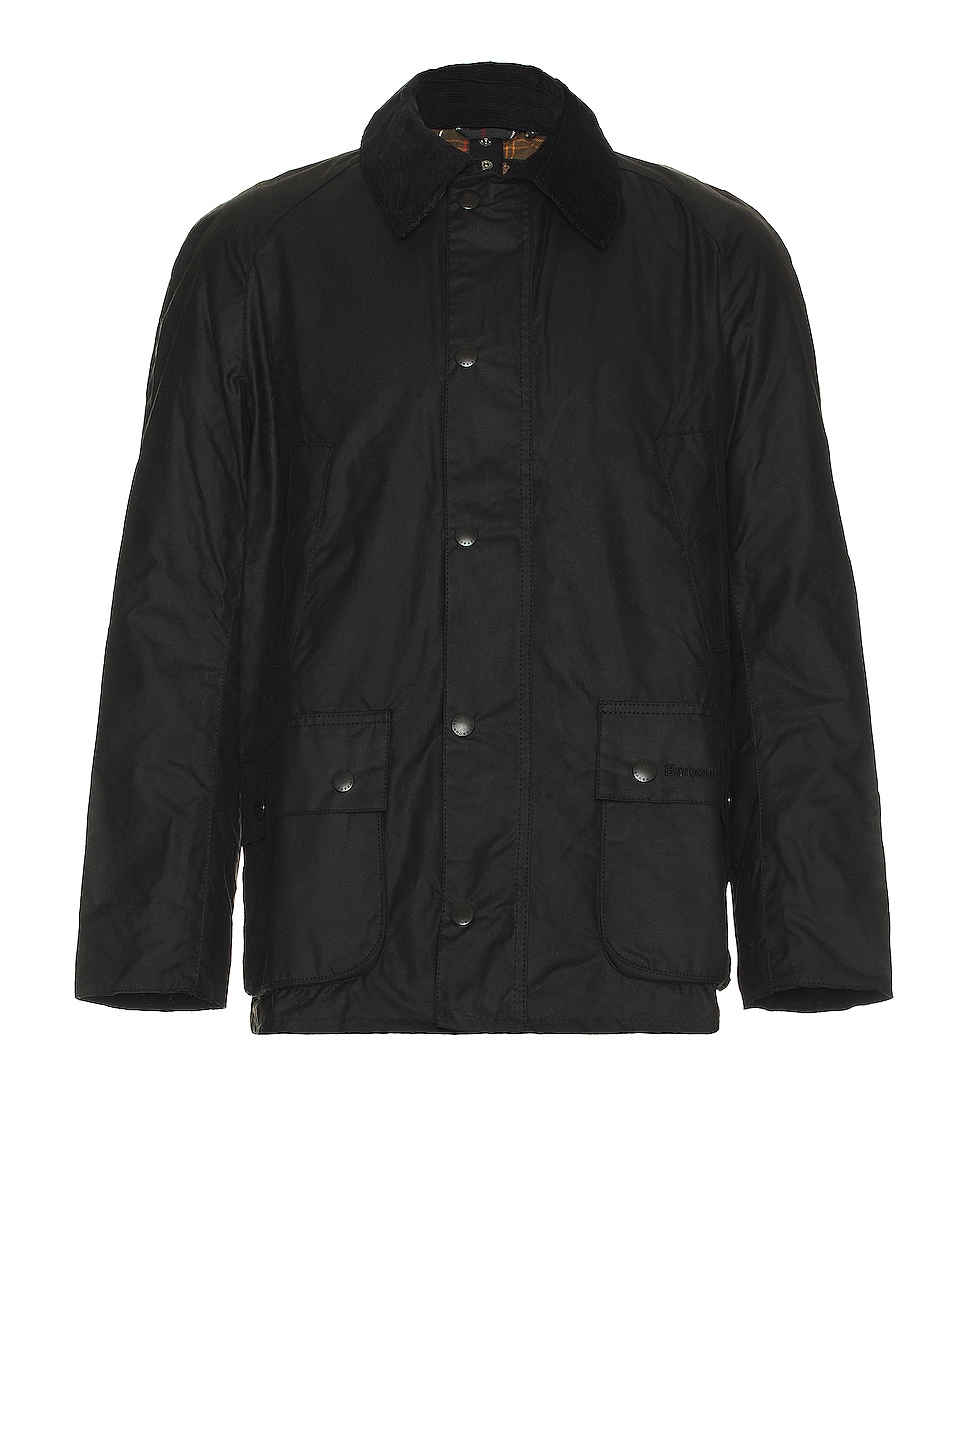 Image 1 of Barbour Ashby Wax Jacket in Black